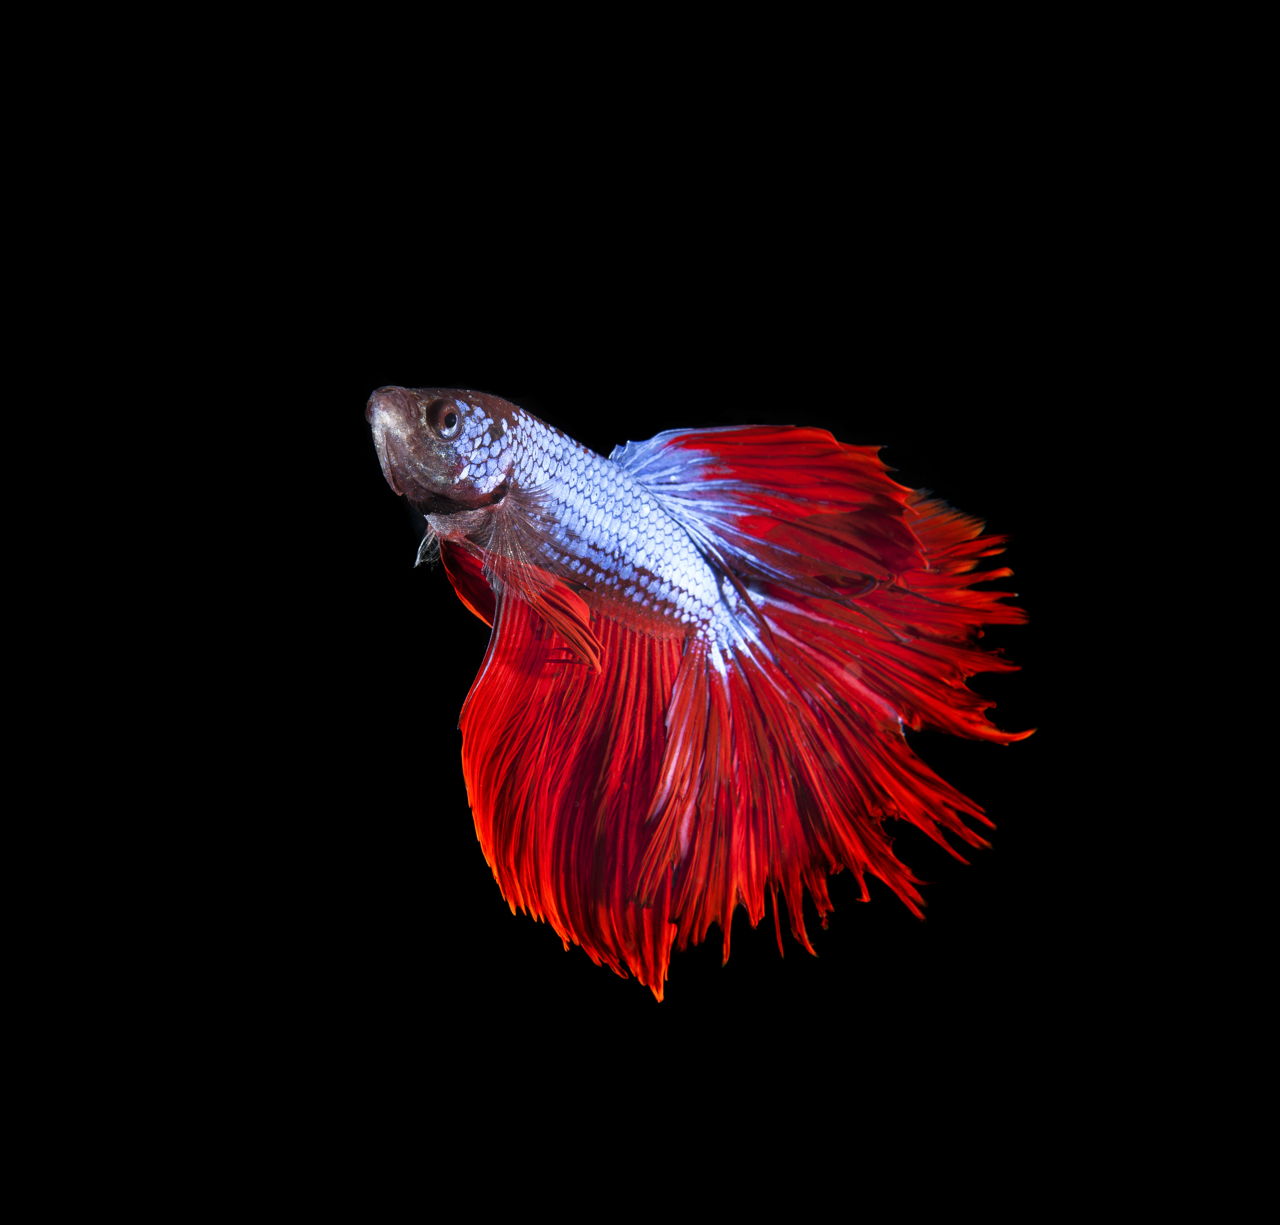 We Suggest Adorable Names for Your Delicate Darling Betta Fish